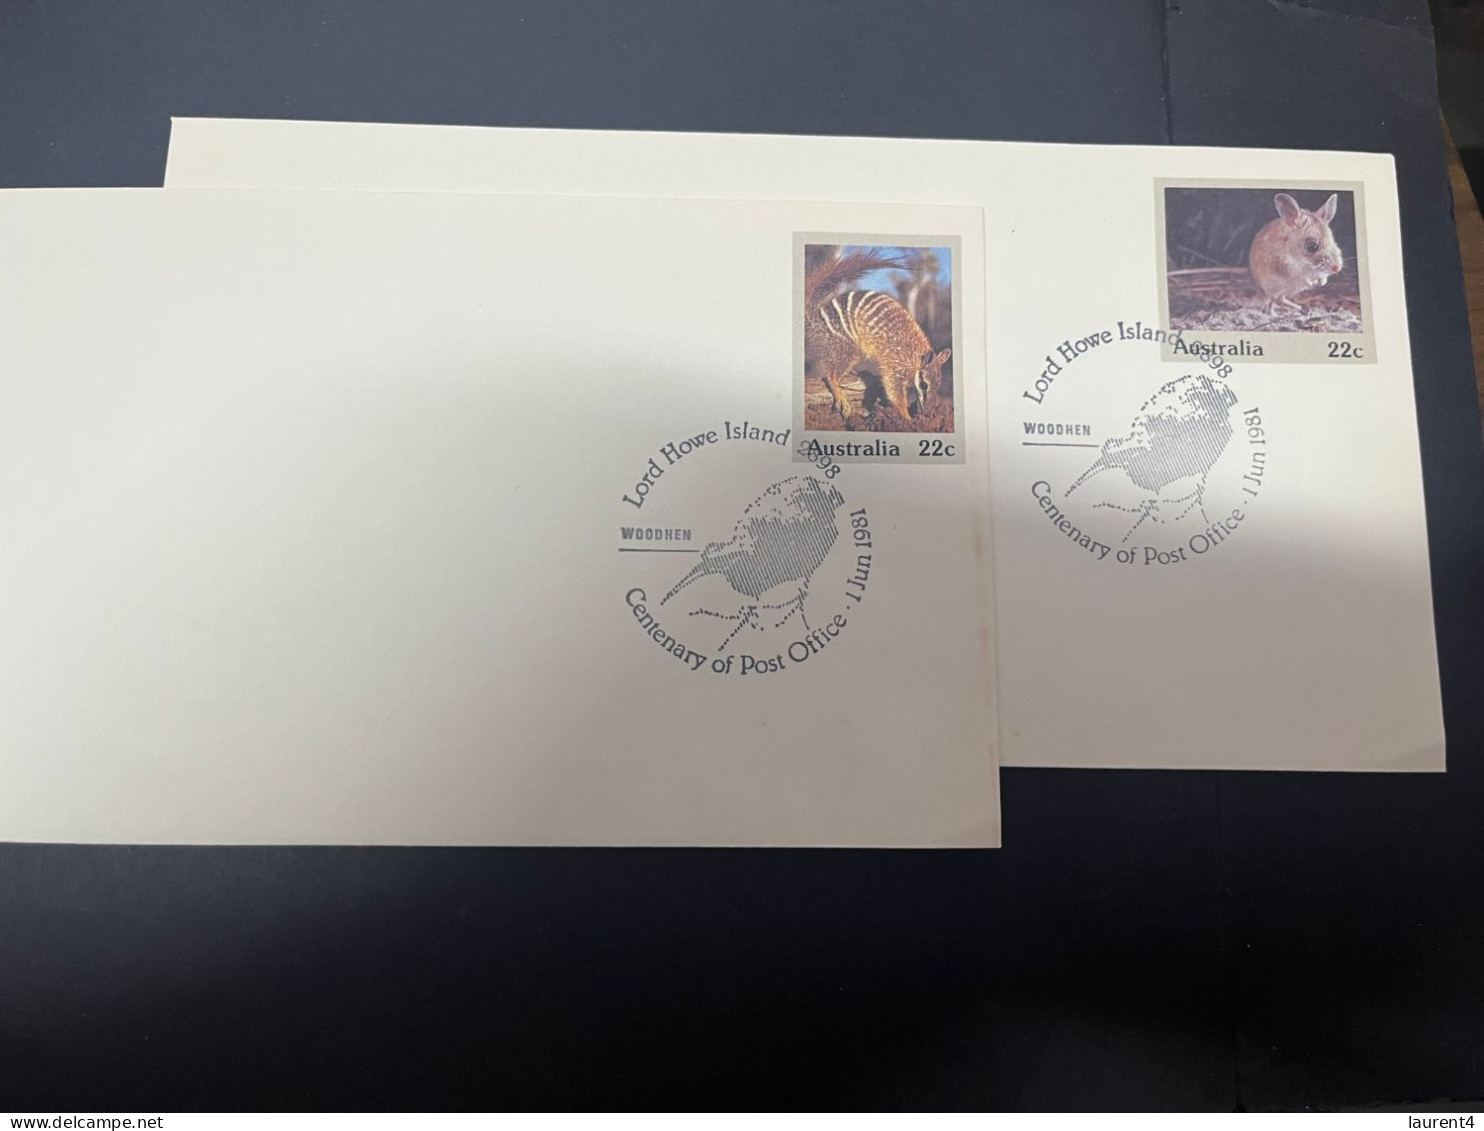 2-5-2024 (3 Z 39) Australia FDC - 1981 - Lord Howe Island - Wooden (special P/m) 2  Covers - Sobre Primer Día (FDC)